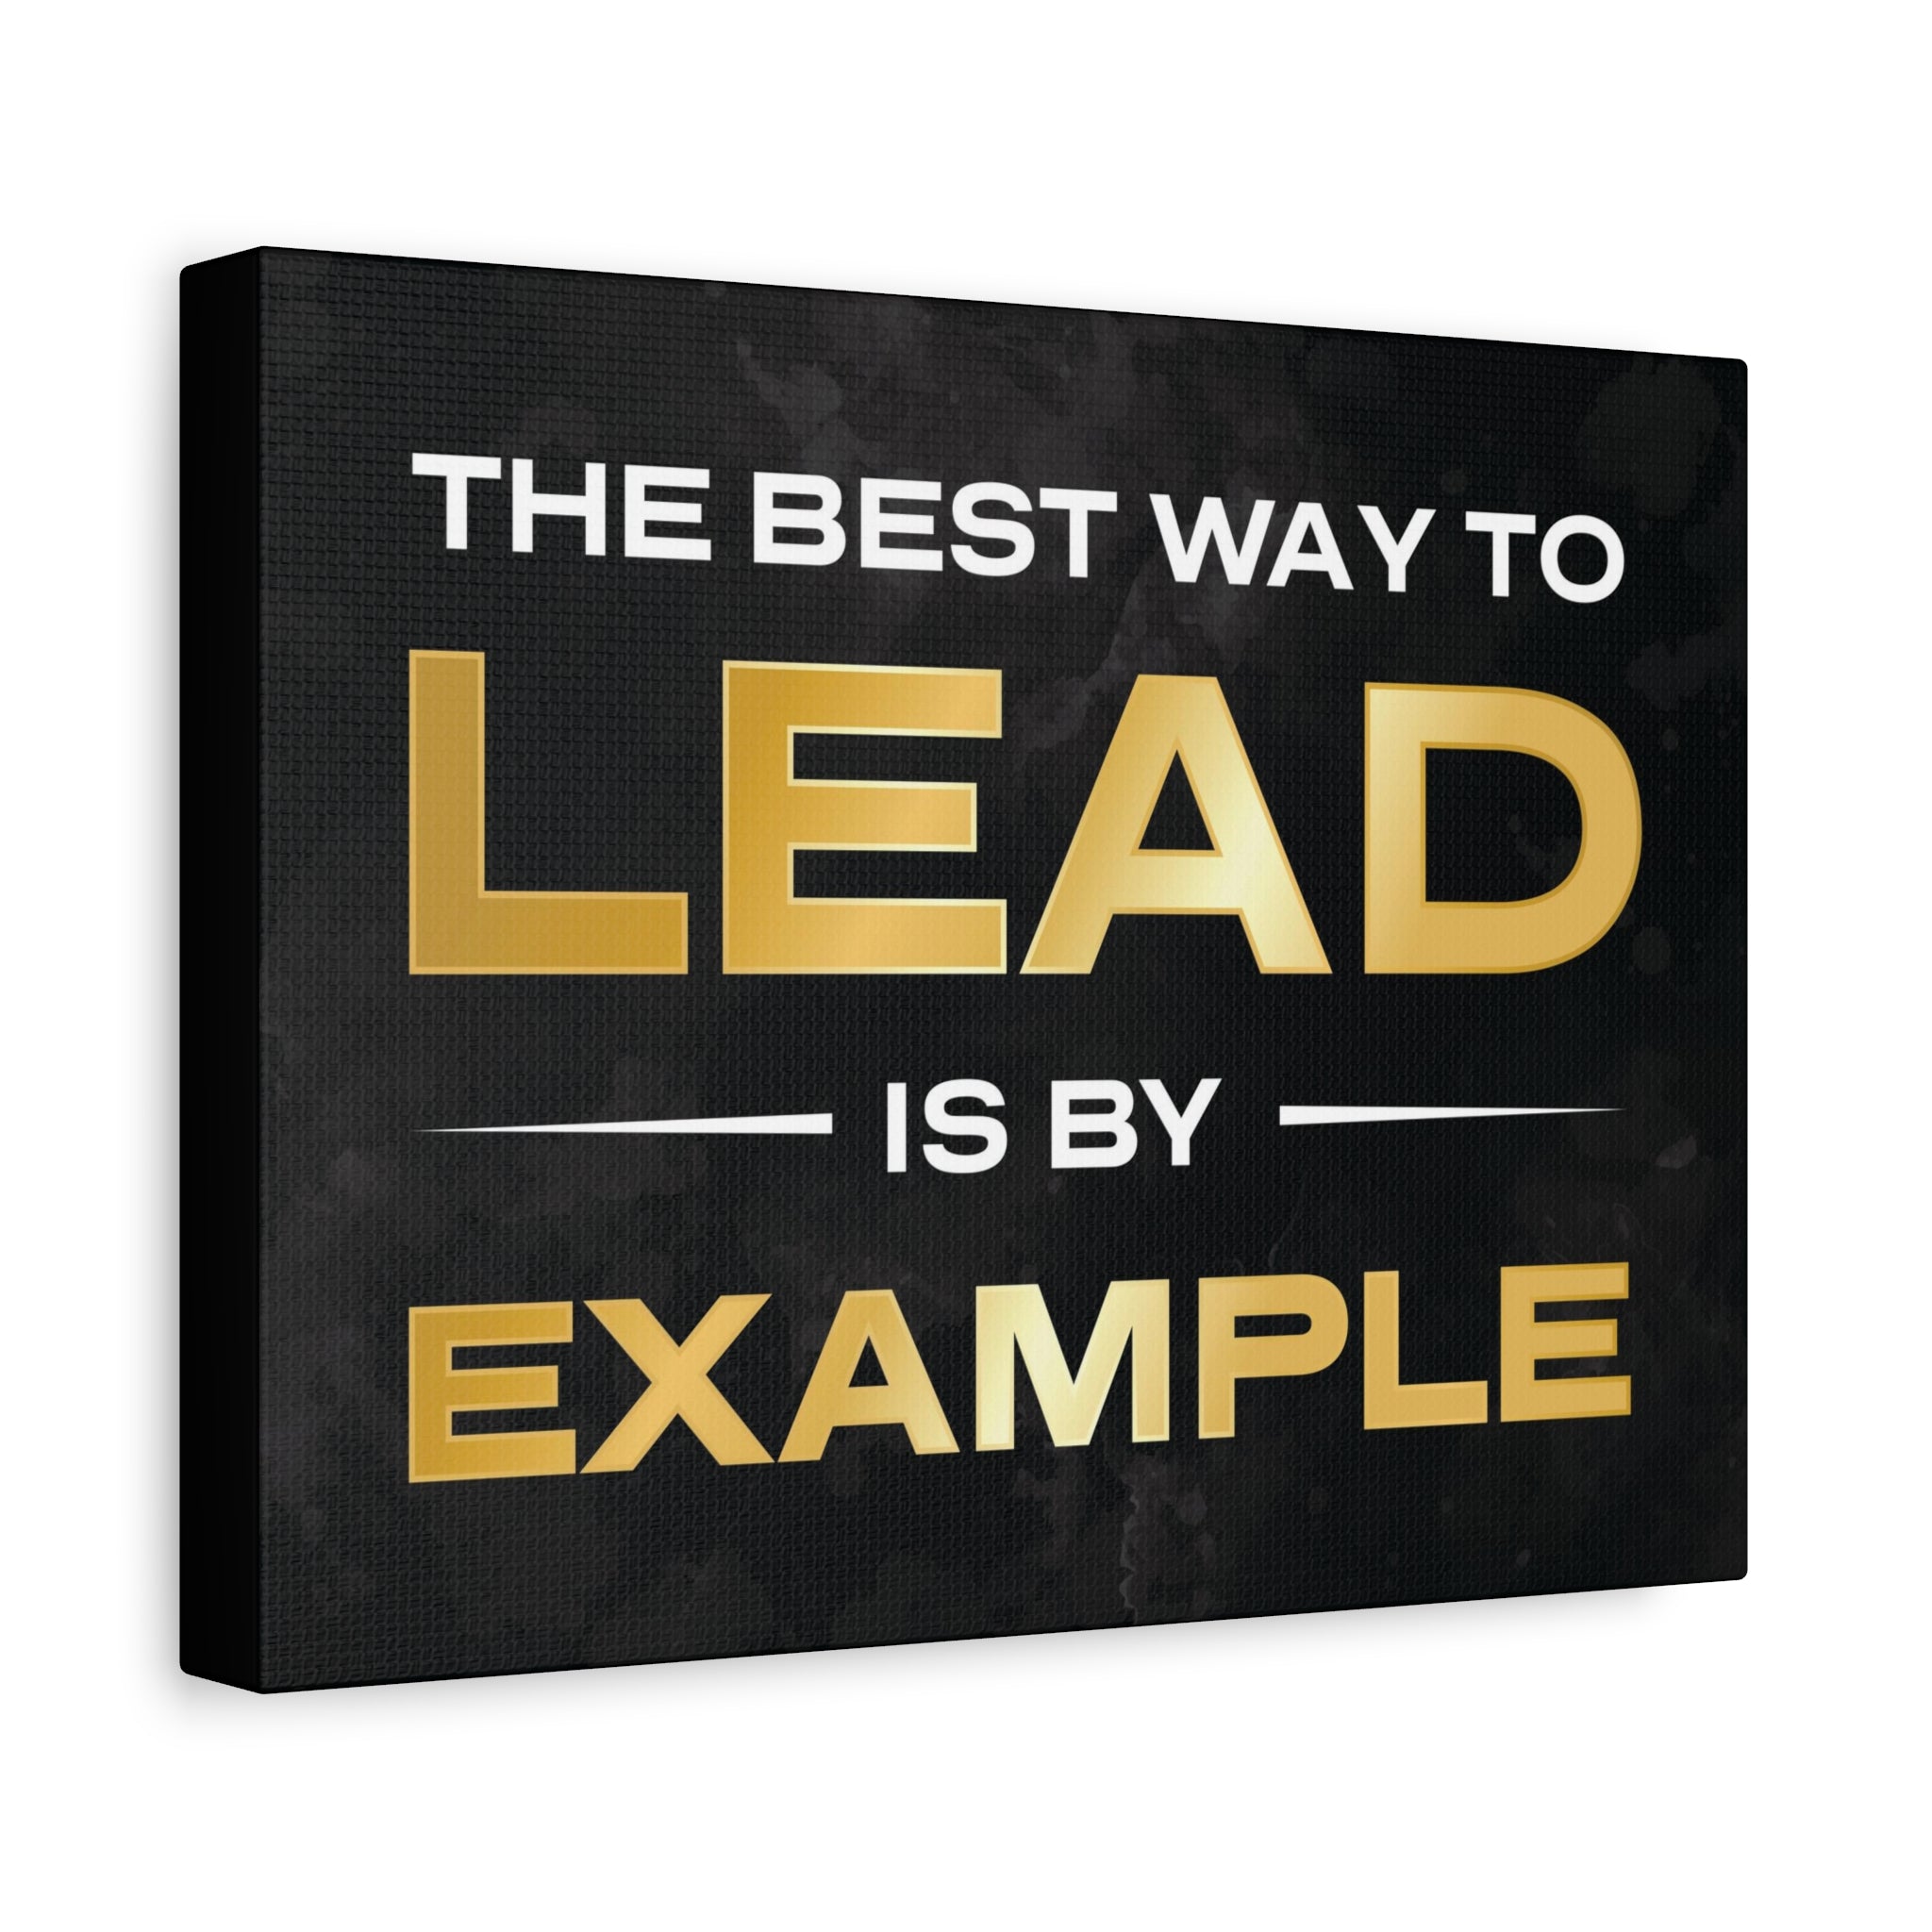 The Best Way To Lead Is By Example Wall Art additional image 2